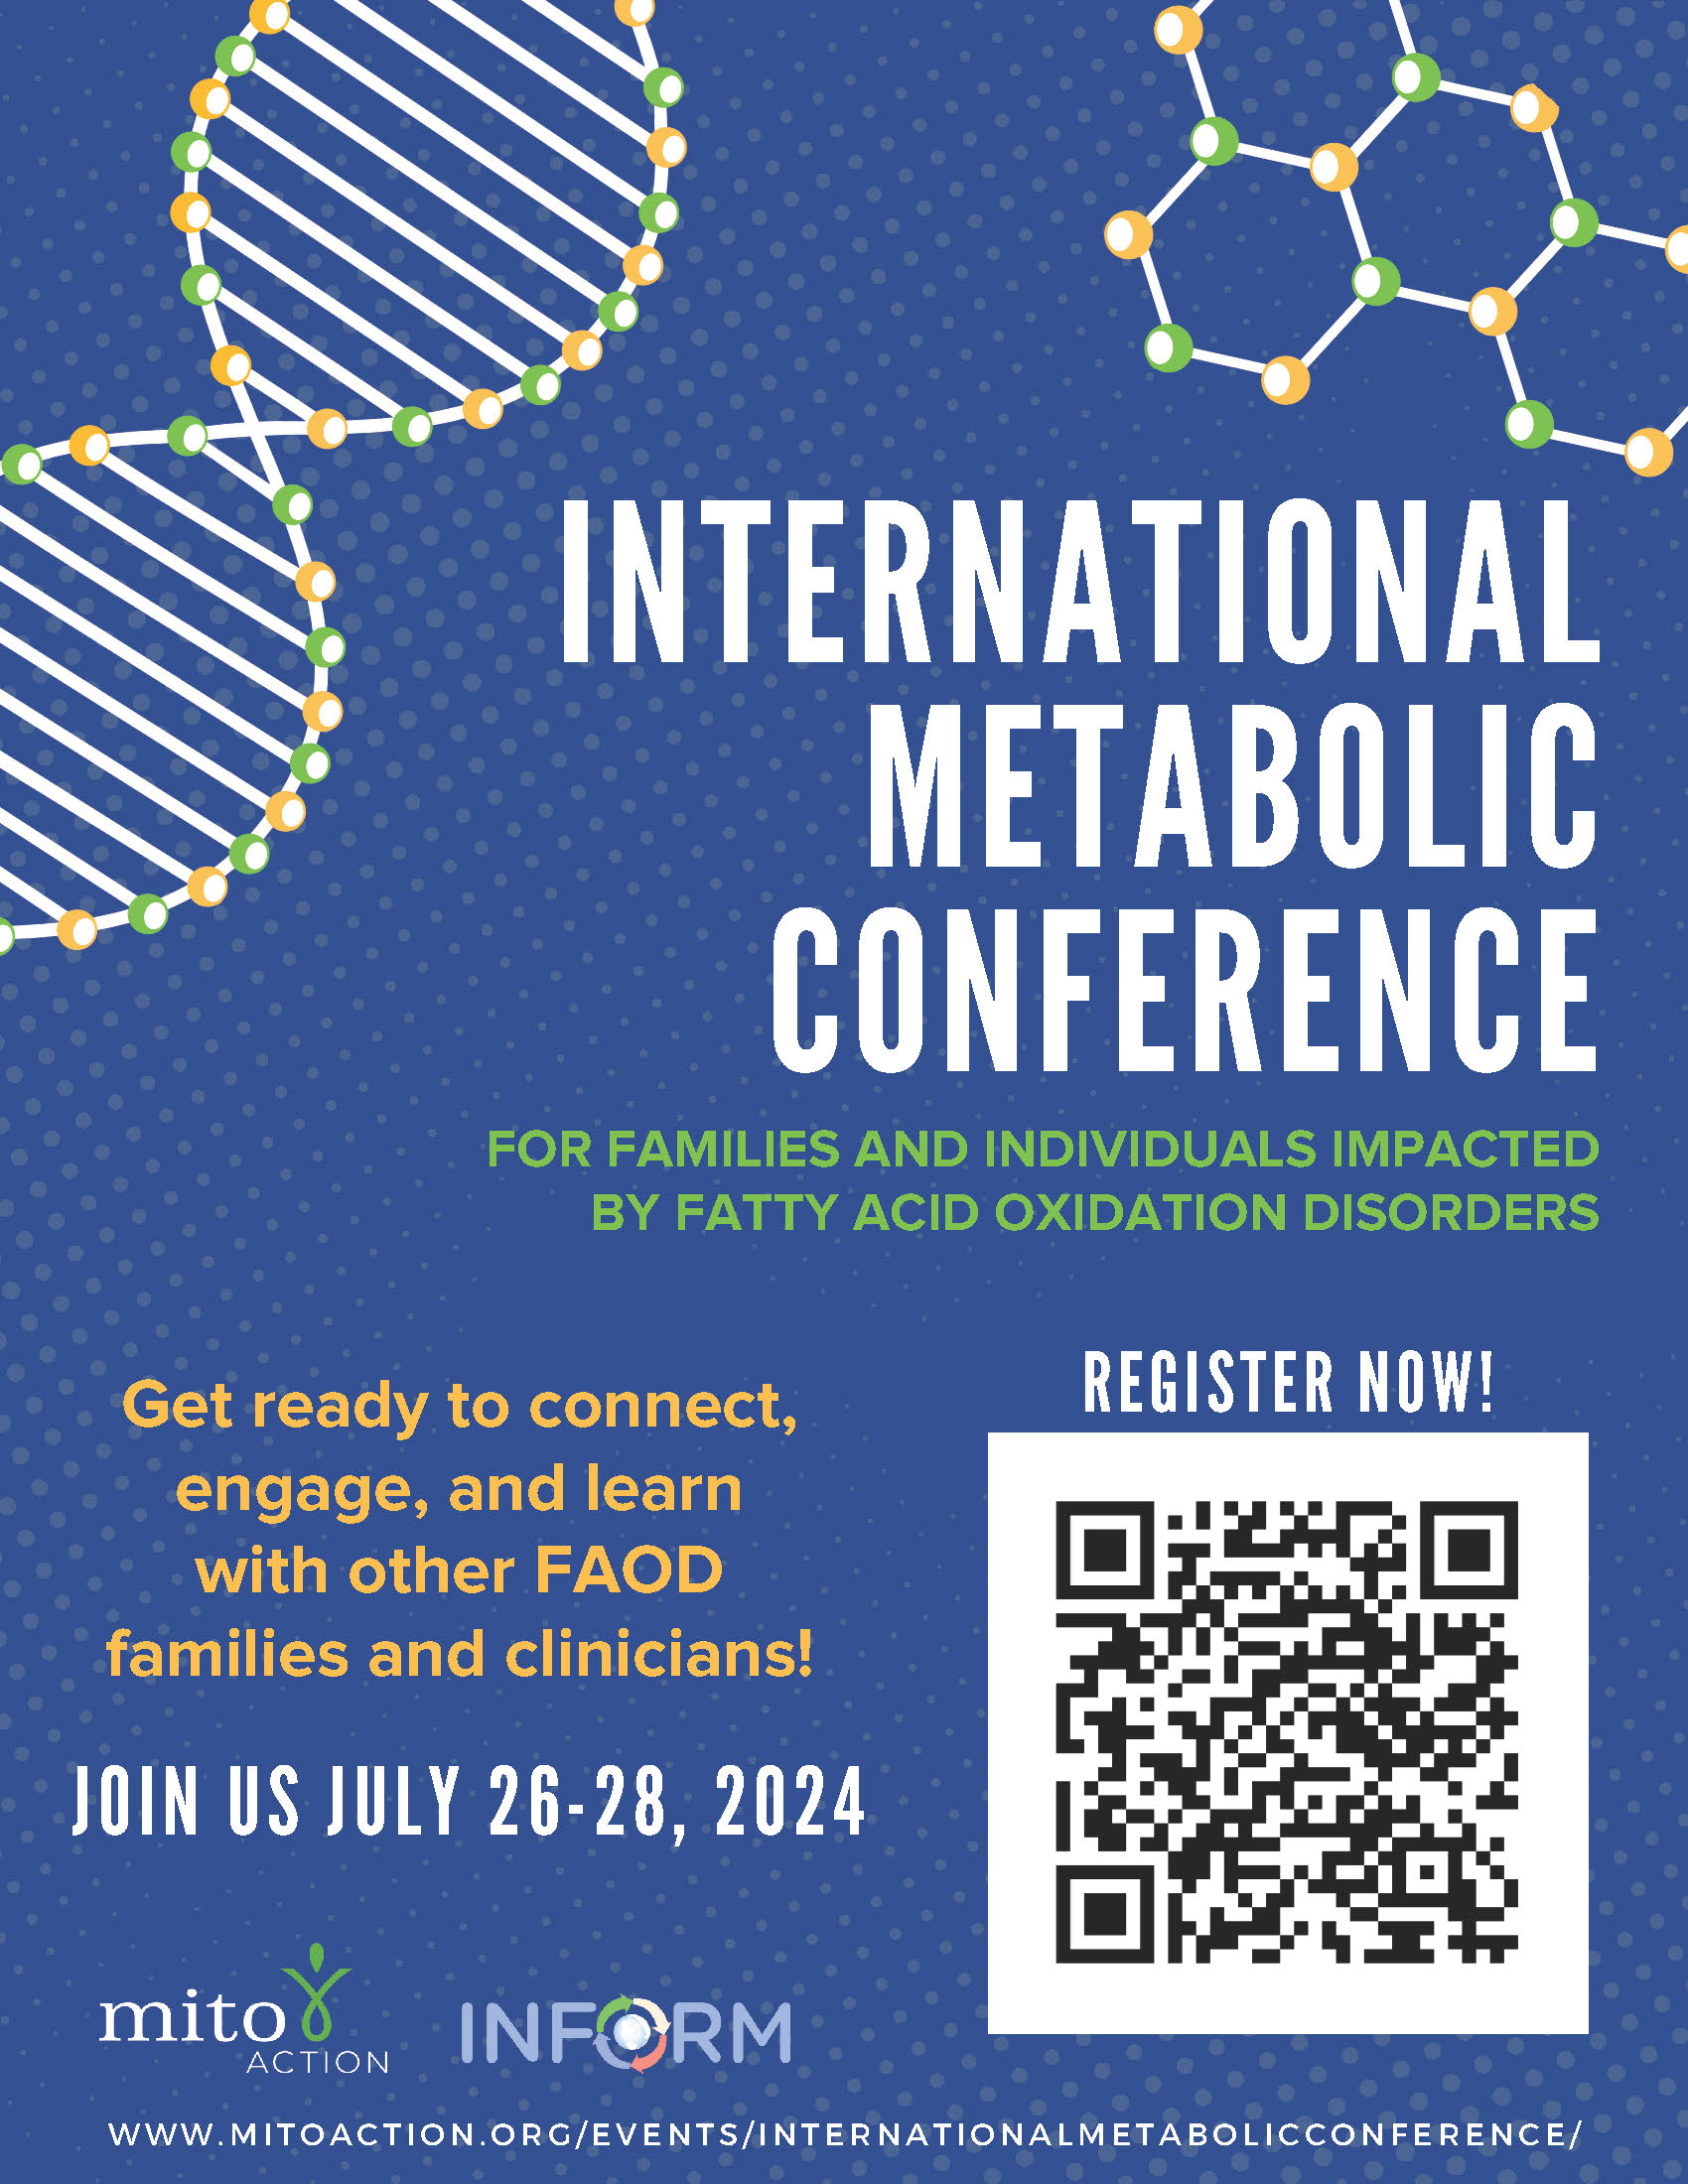 International Metabolic Conference Flyer, July 26-28, 2024, with QR code to registe.r